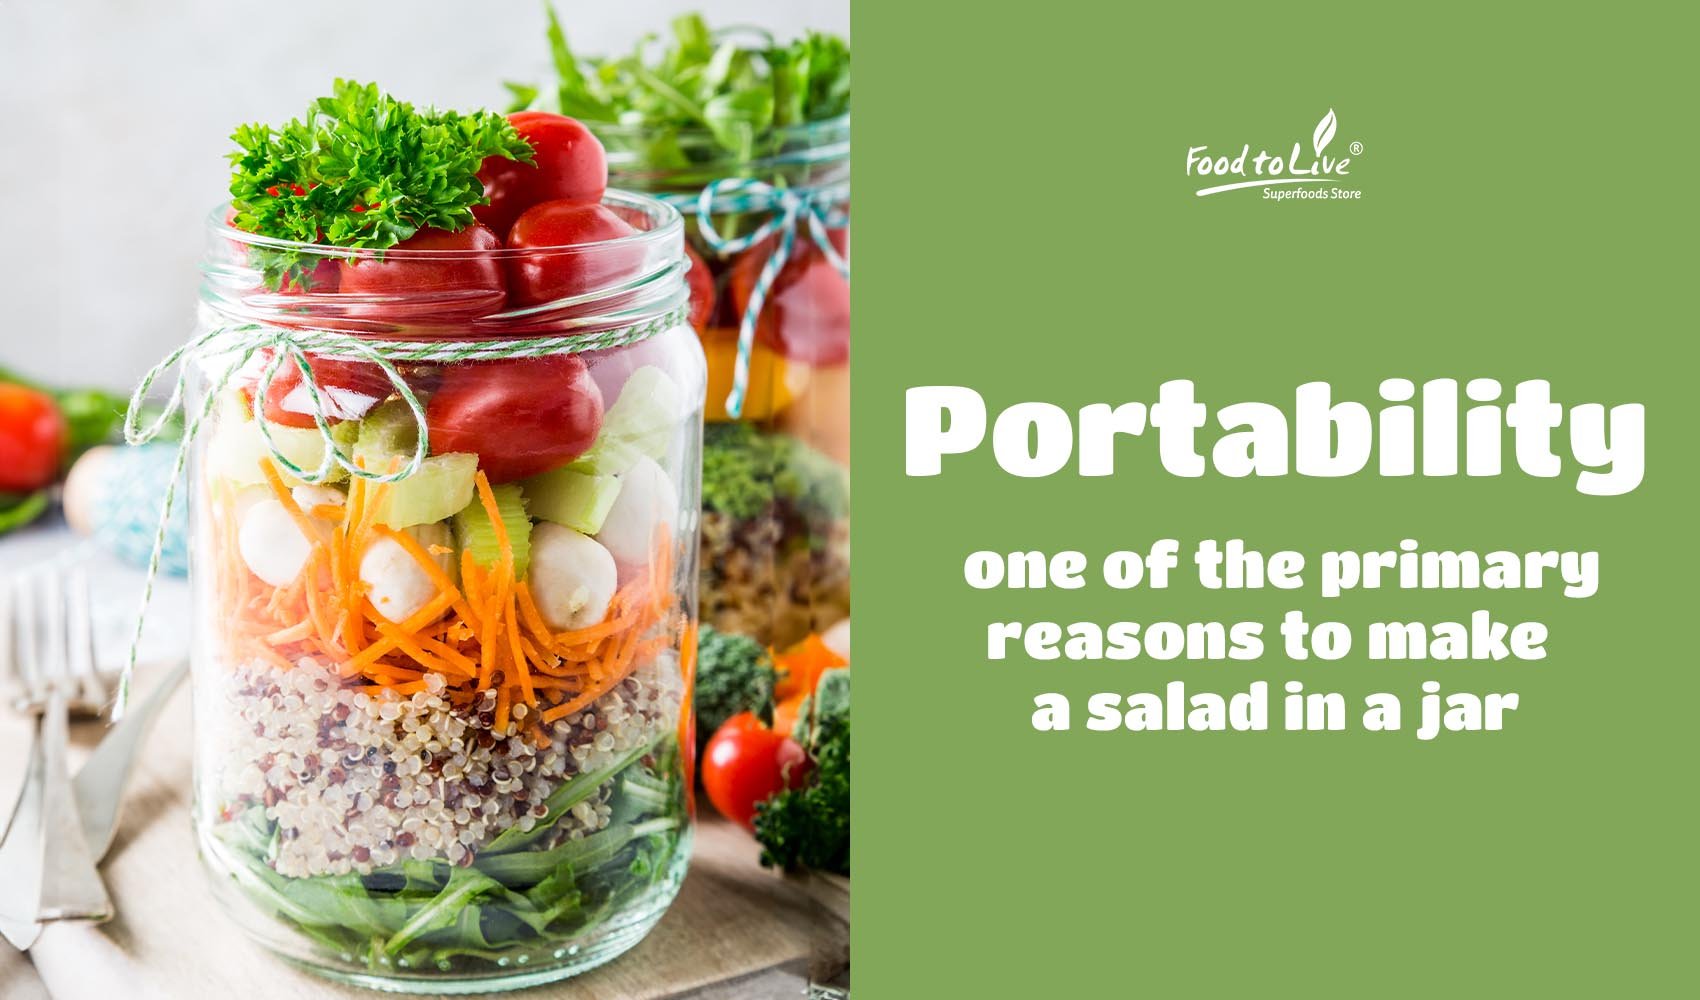 All-You-Need-to-Know-About-Jar-Salads-3 copy